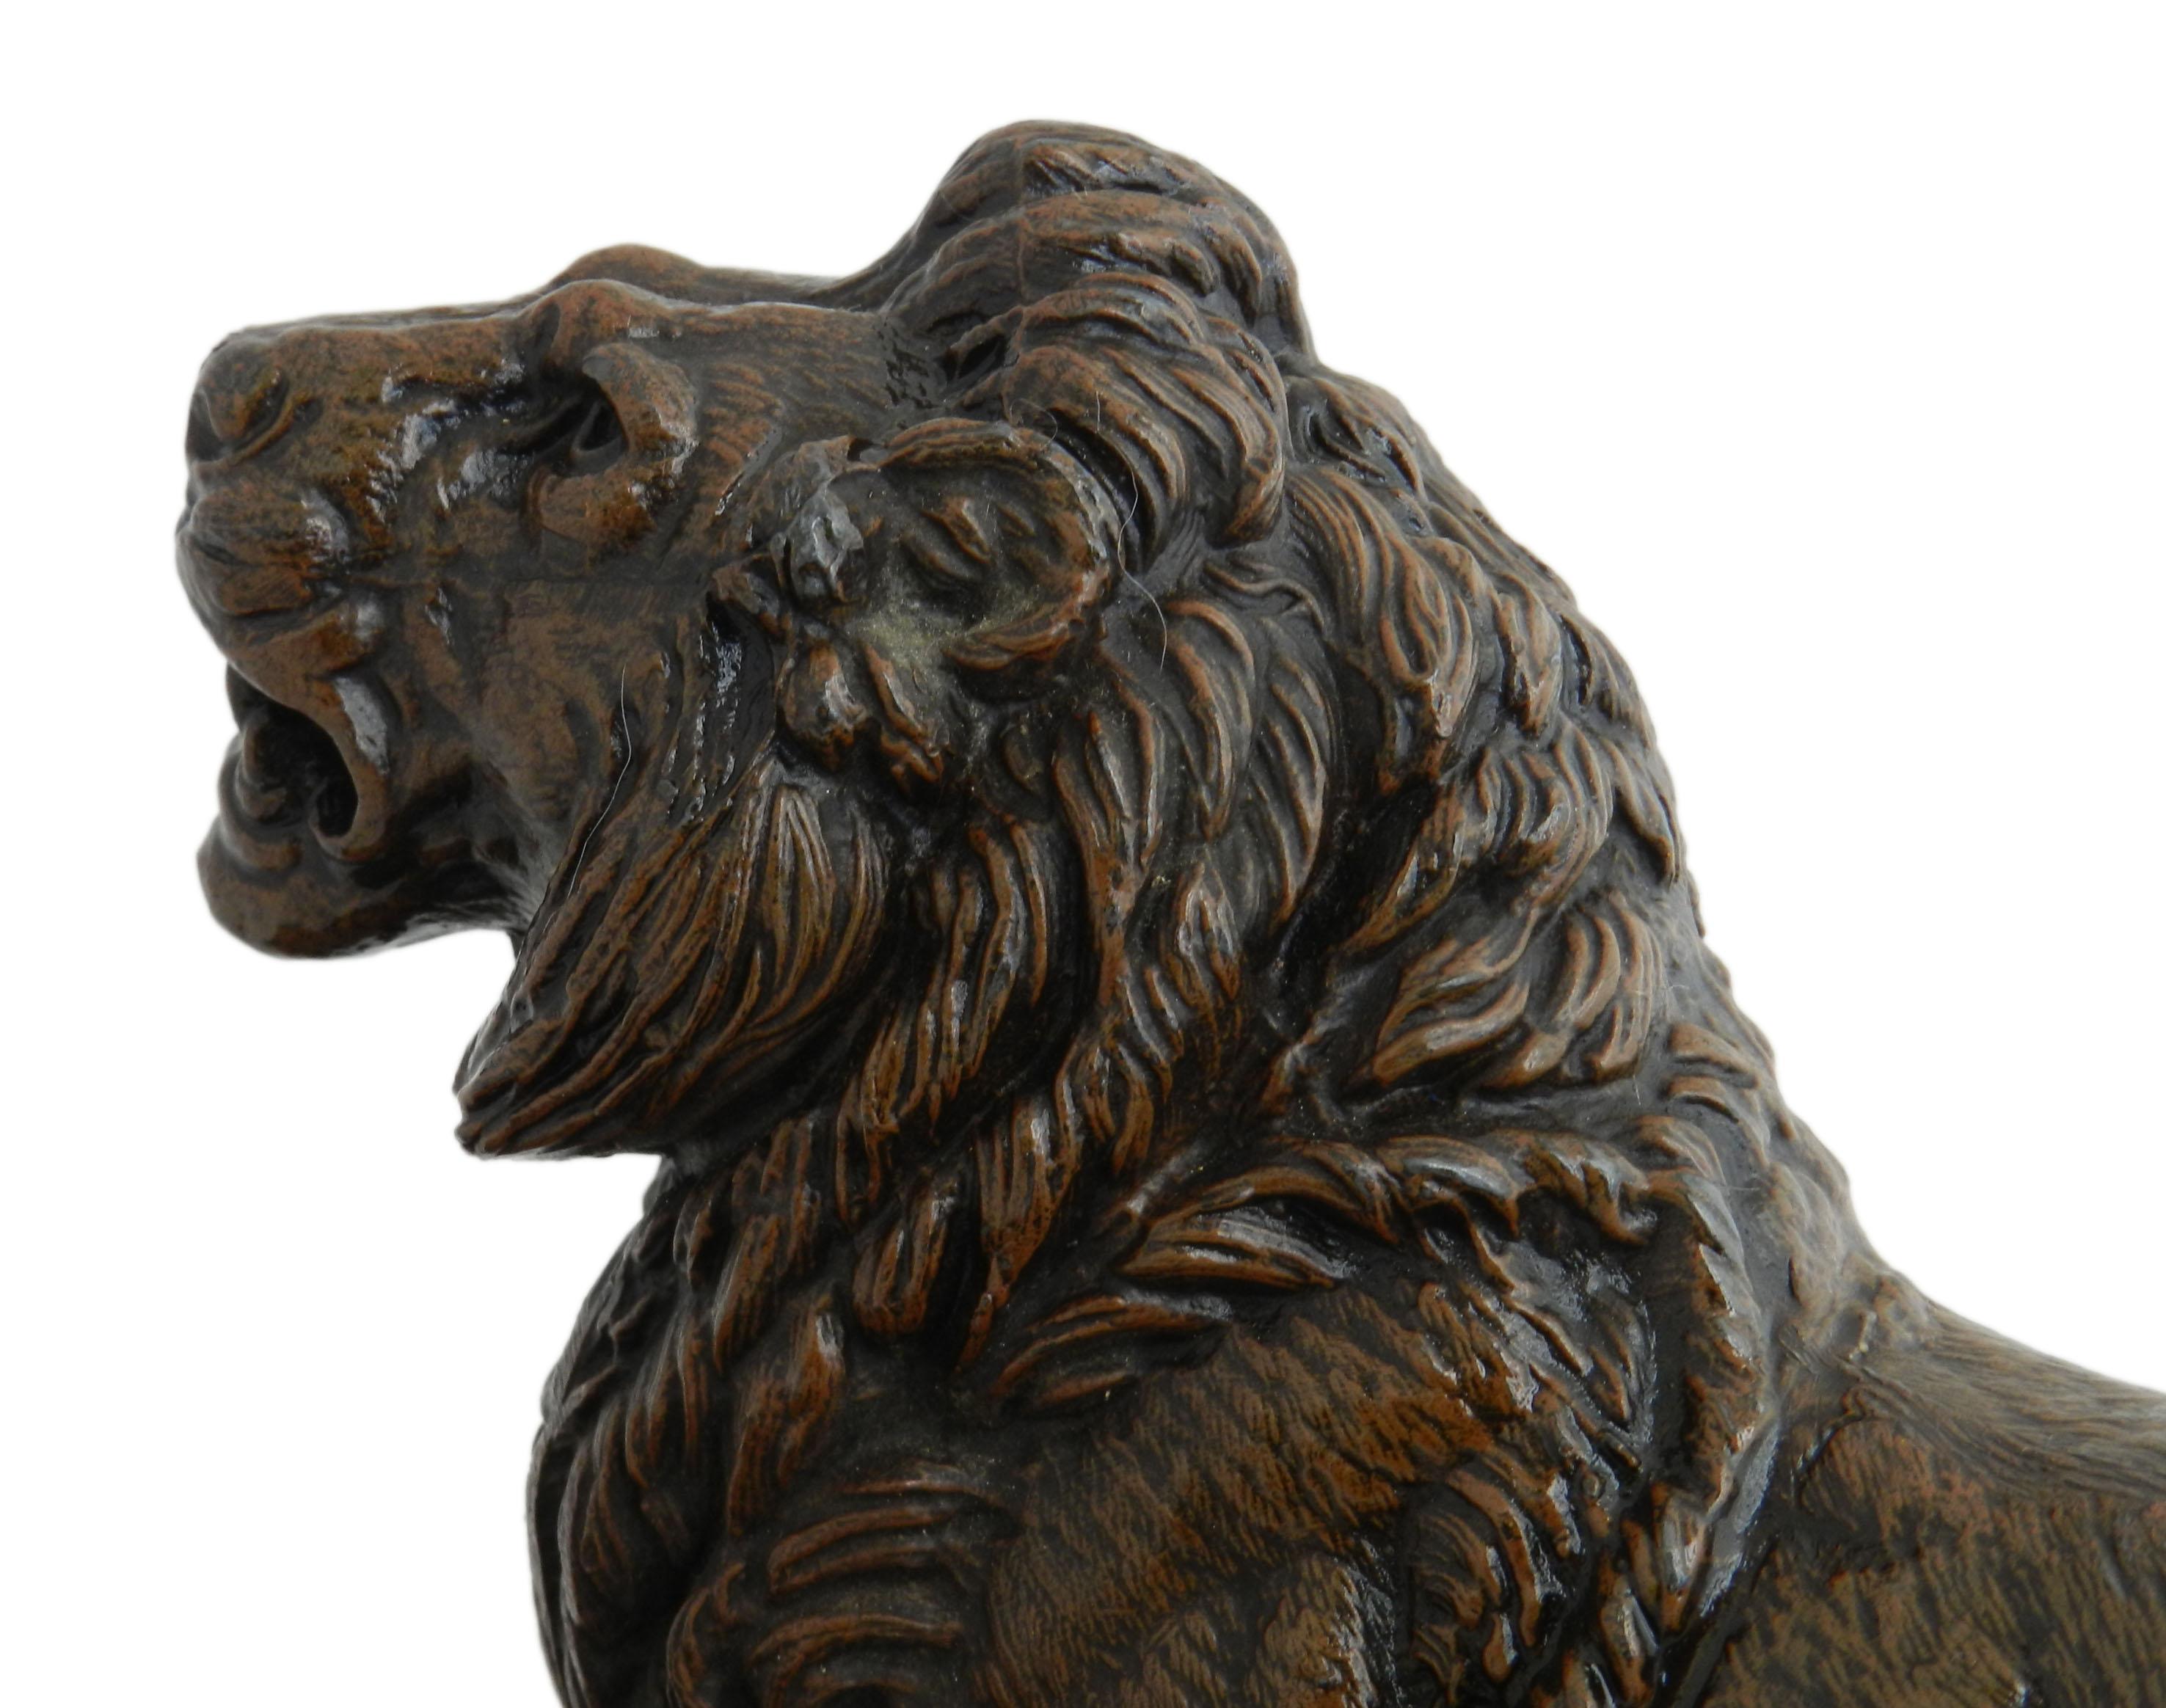 Antique Lion Inkwell Desk Inkstand French c1890
Handsome Lion
Bronze 
Good condition with minor signs of wear for its age.



